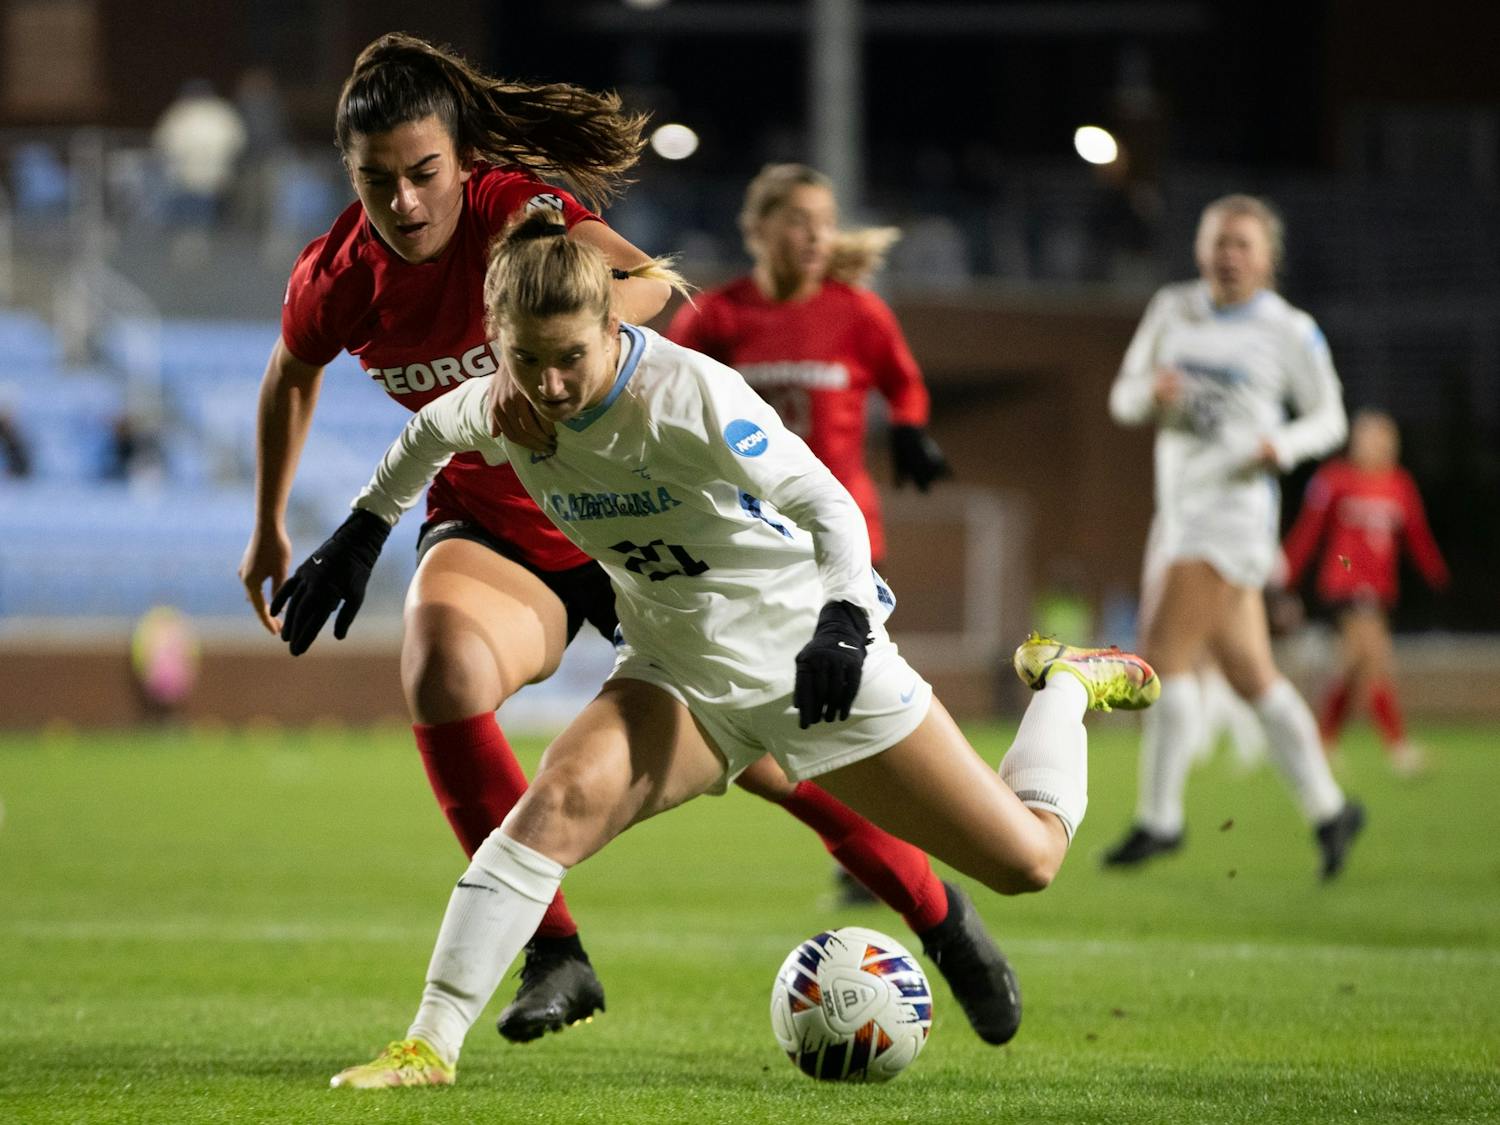 UNC redshirt first-year Ally Sentnor (21) protects the ball during the women's soccer game against Georgia on Thursday, Nov. 17, 2022, at Dorrance Field. UNC beat Georgia 3-1.